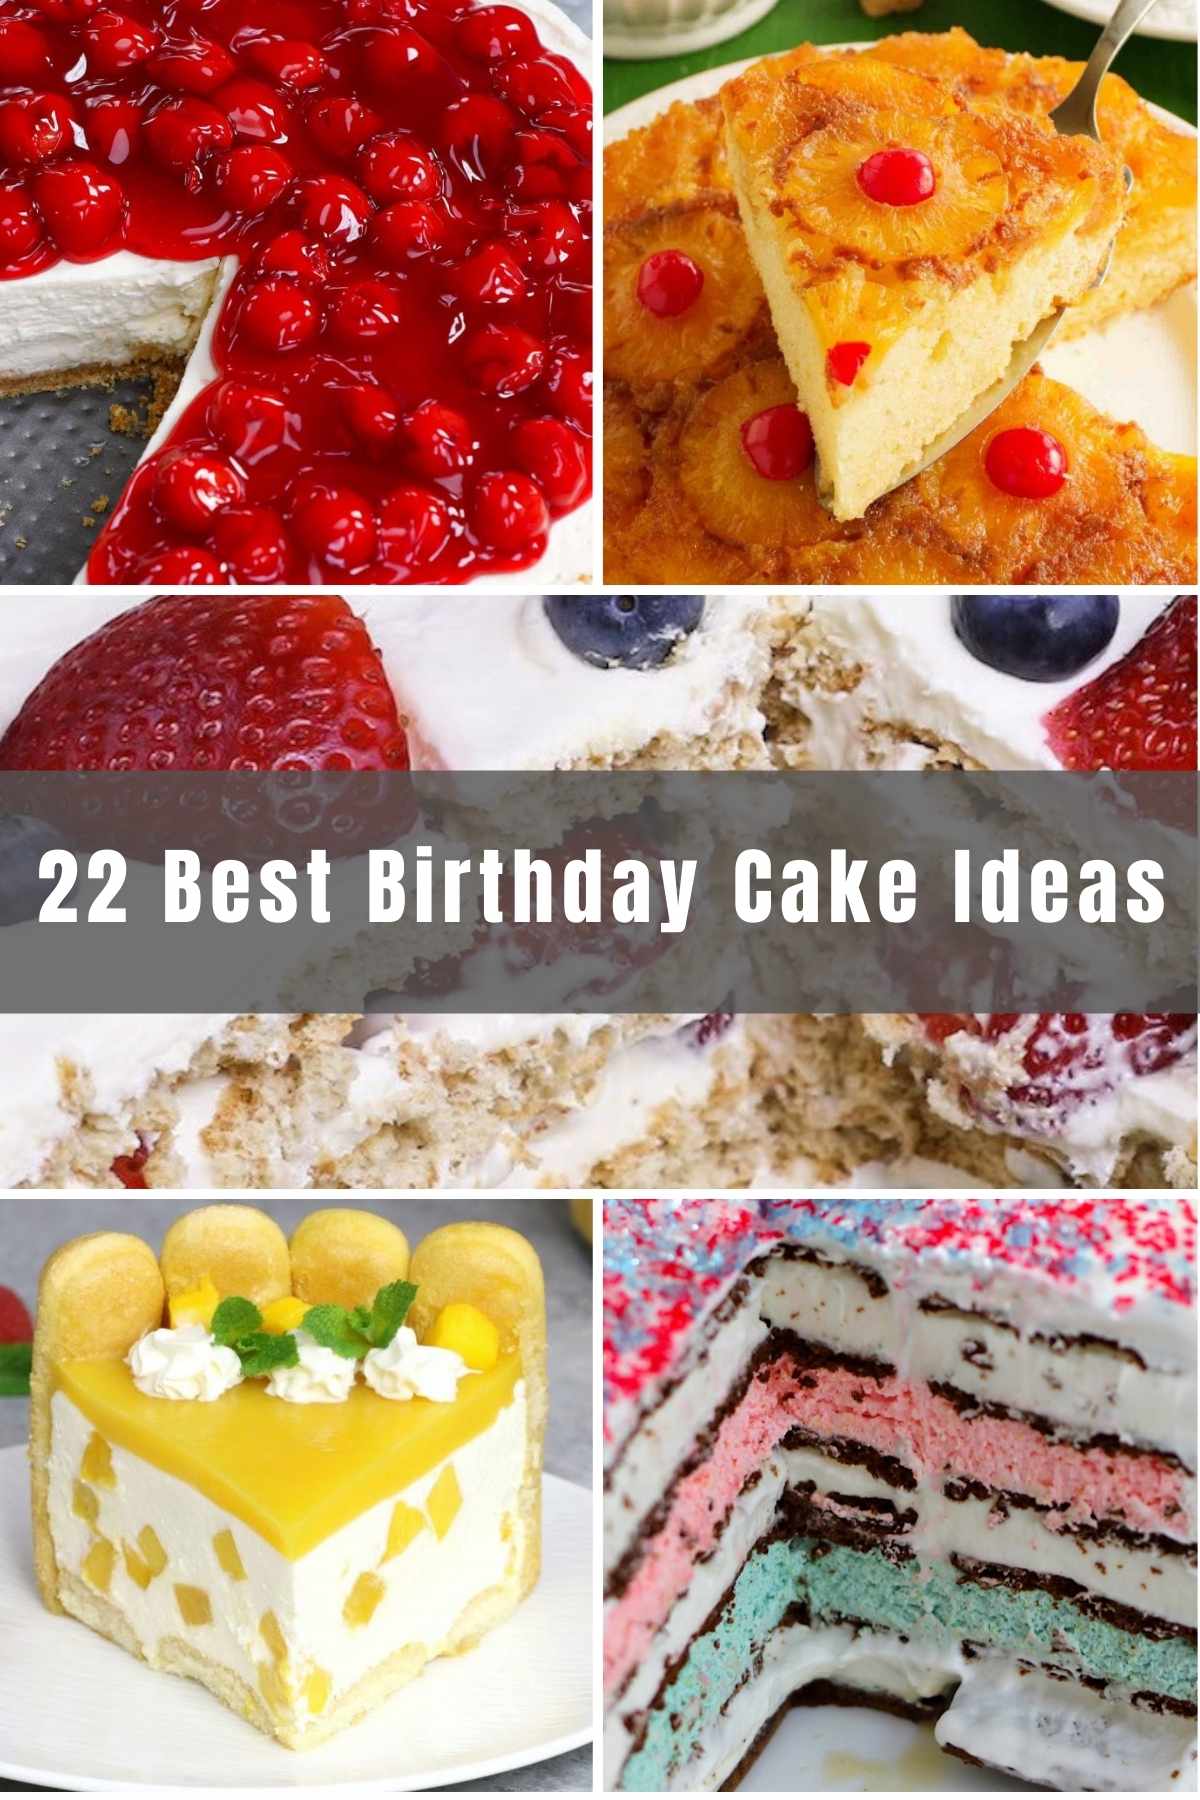 The sky's the limit when it comes to birthday celebration treats. If your birthday is coming up or you’re the baker in the family, we’re sharing 22 of the Best Birthday Cake Ideas for adults and kids, boys and girls. Take a look for some sweet inspiration!